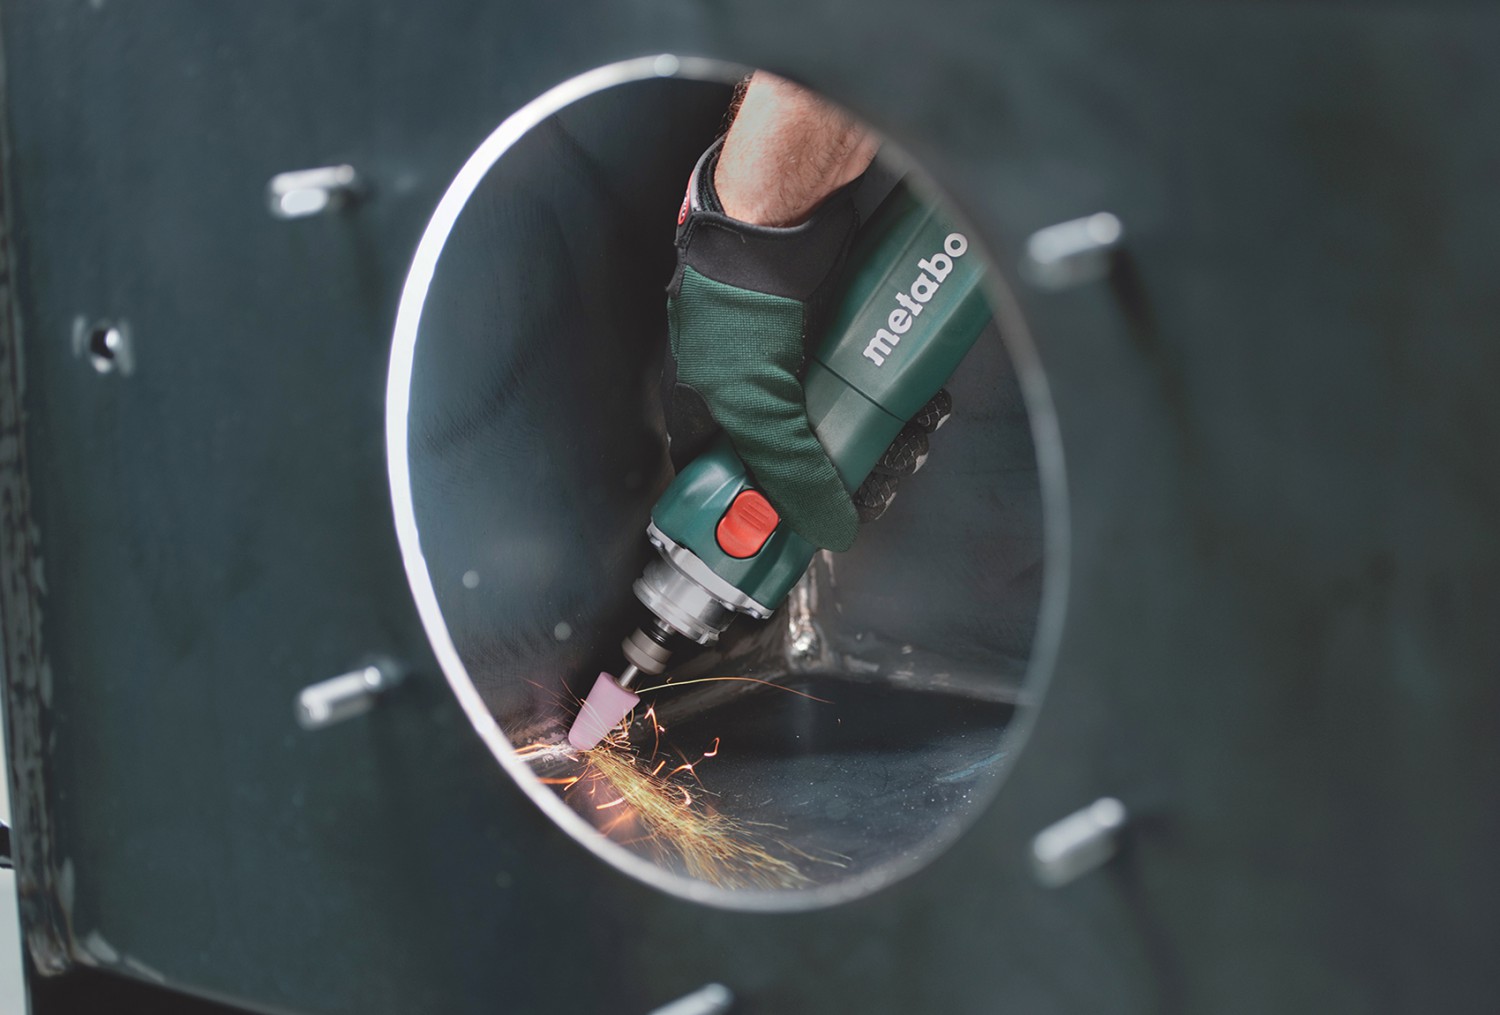 An Electric Die Grinder That Fits Tight Spots and Tight Budgets